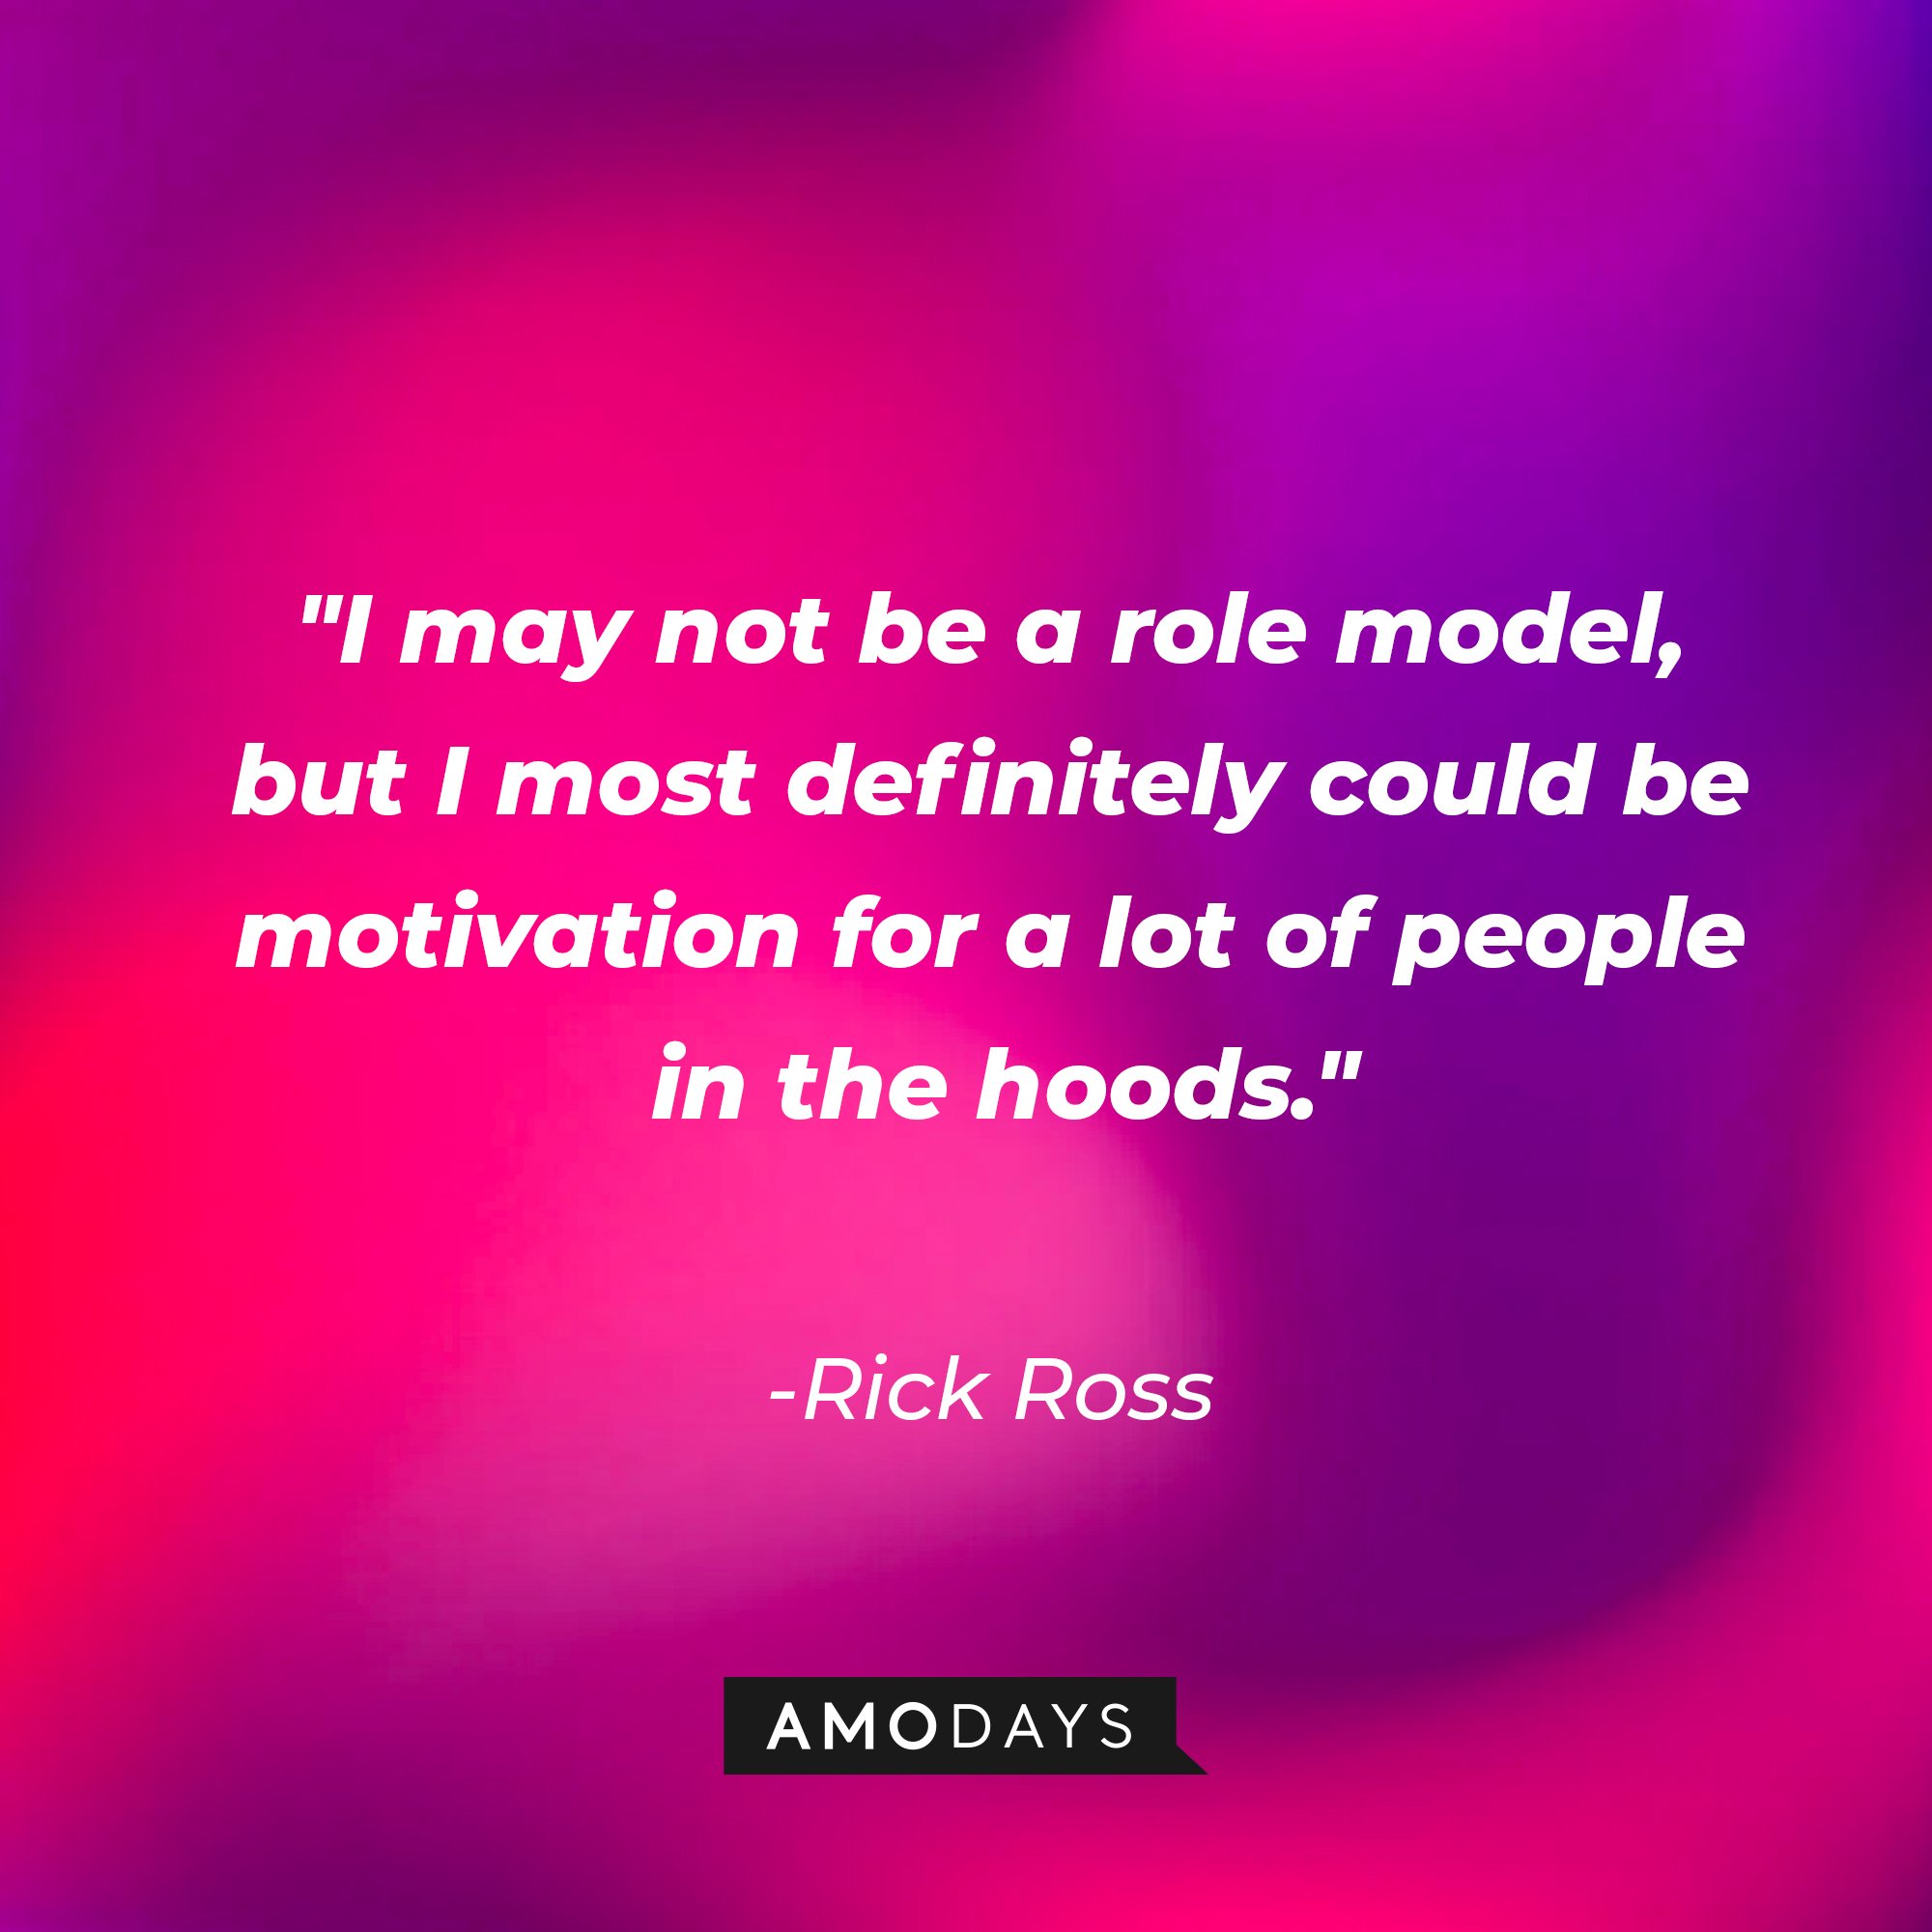 Rick Ross' quote: "I may not be a role model, but I most definitely could be motivation for a lot of people in the hoods." | Image: AmoDays